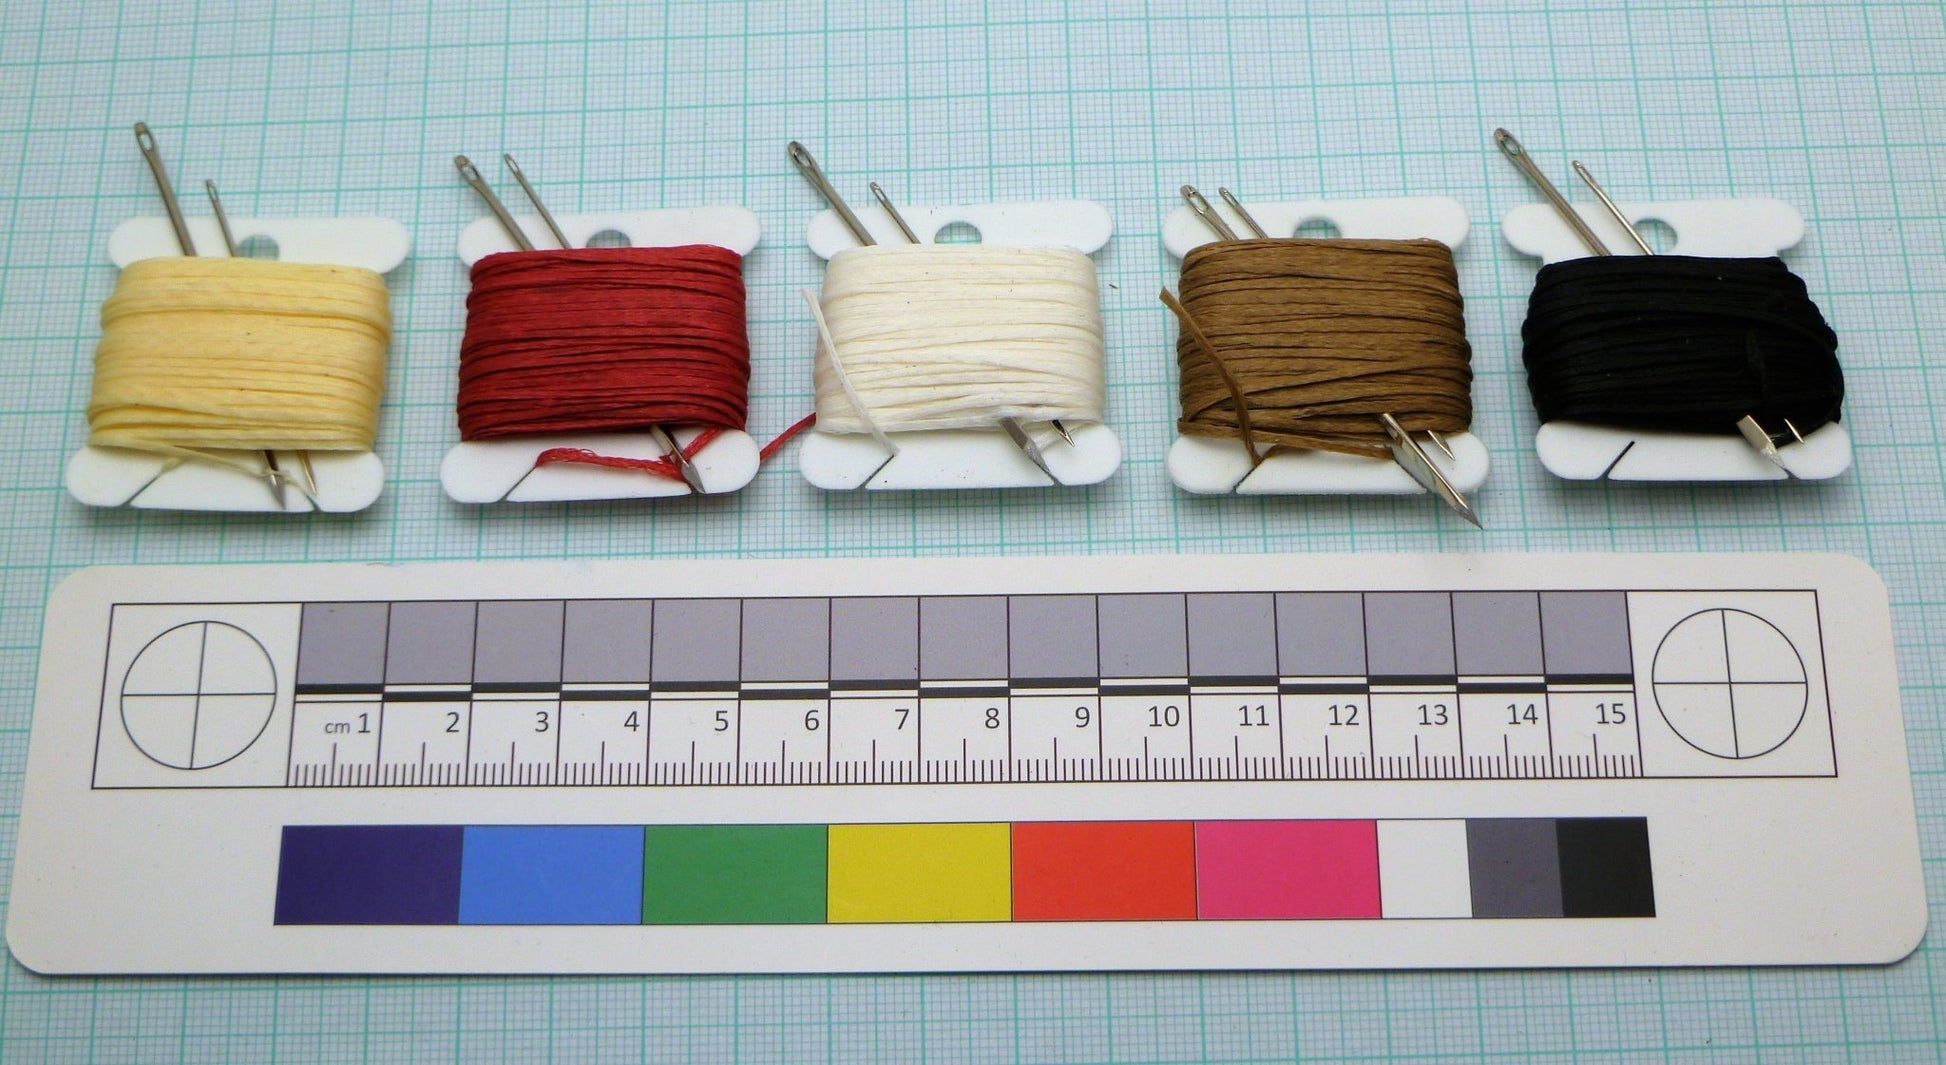 Waxed thread and needles for leather repair or Canvas Sail Carpet Sack Upholstery Waxed Thread Huggins Attic    [Huggins attic]